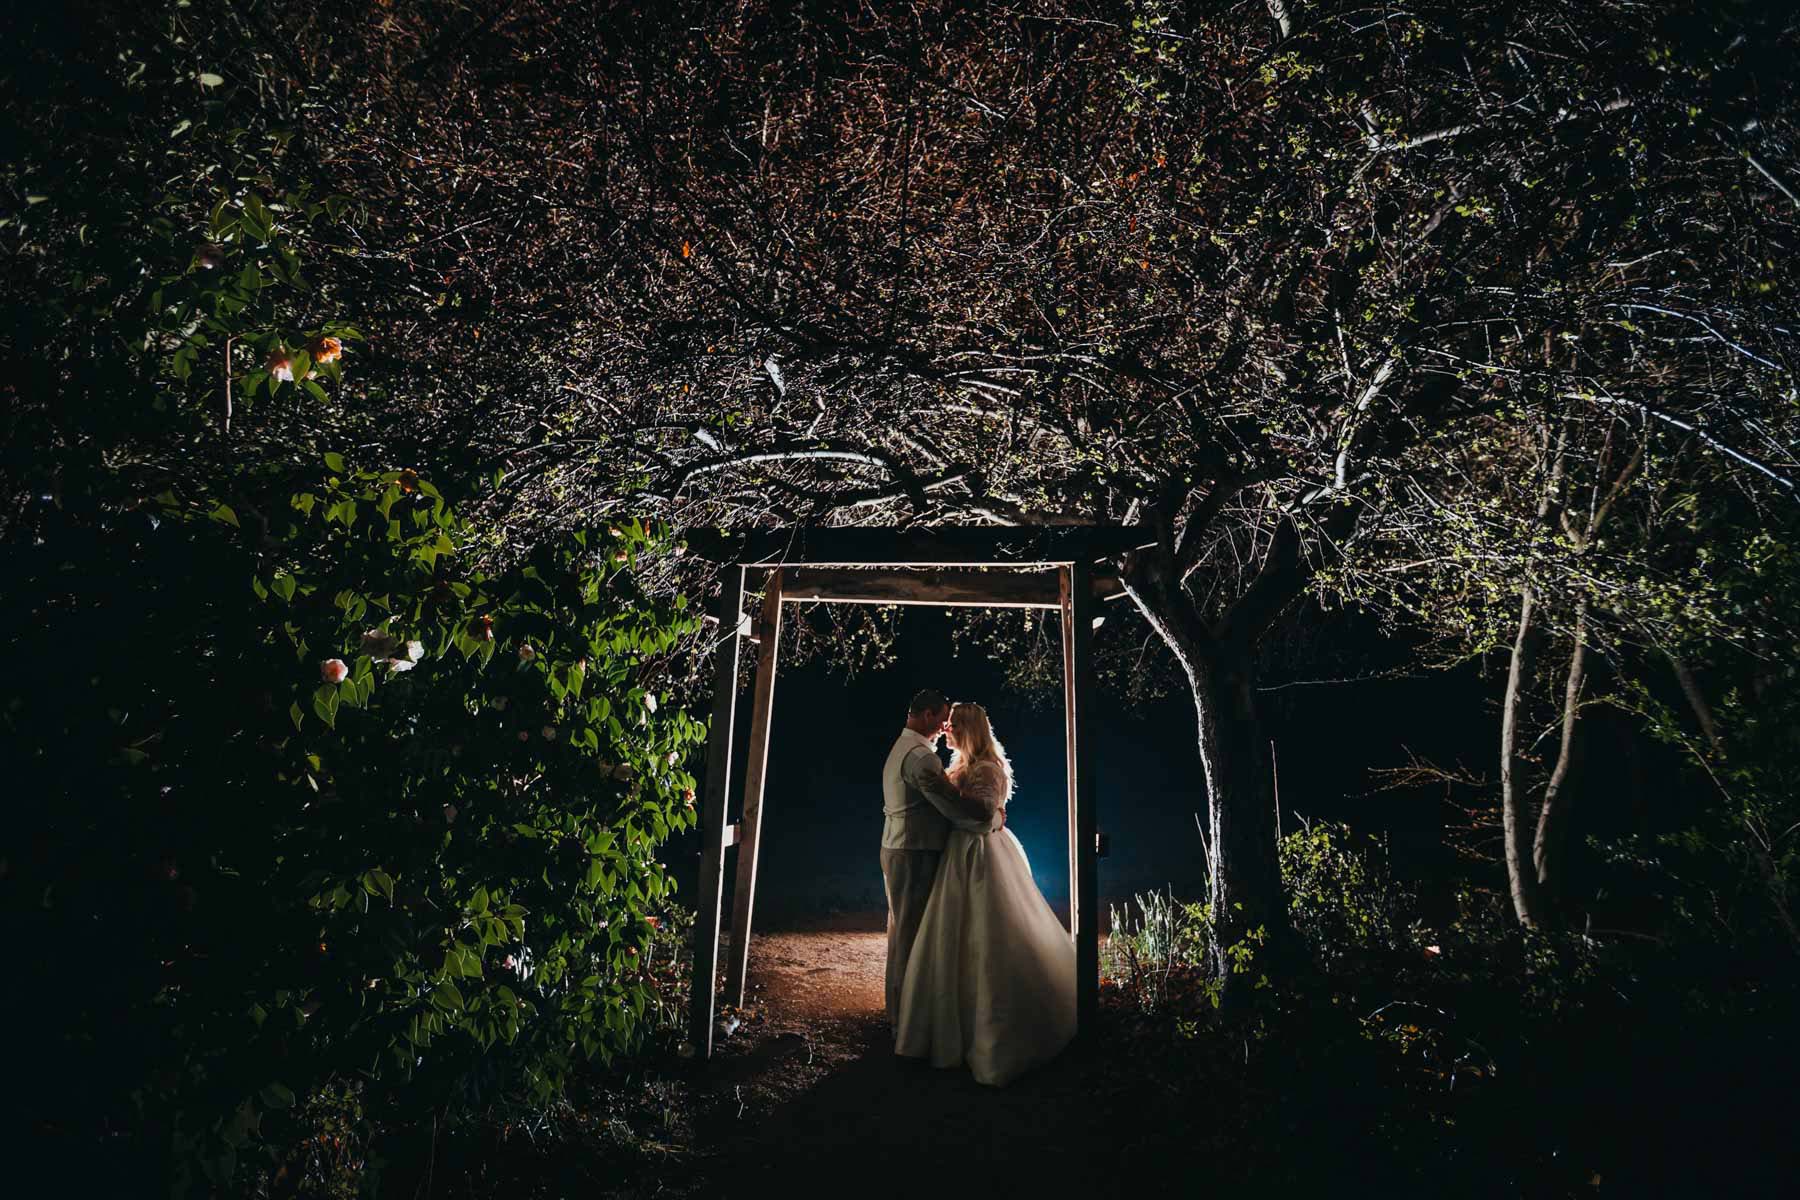 A night photograph of a married couple standing under the wedding arch